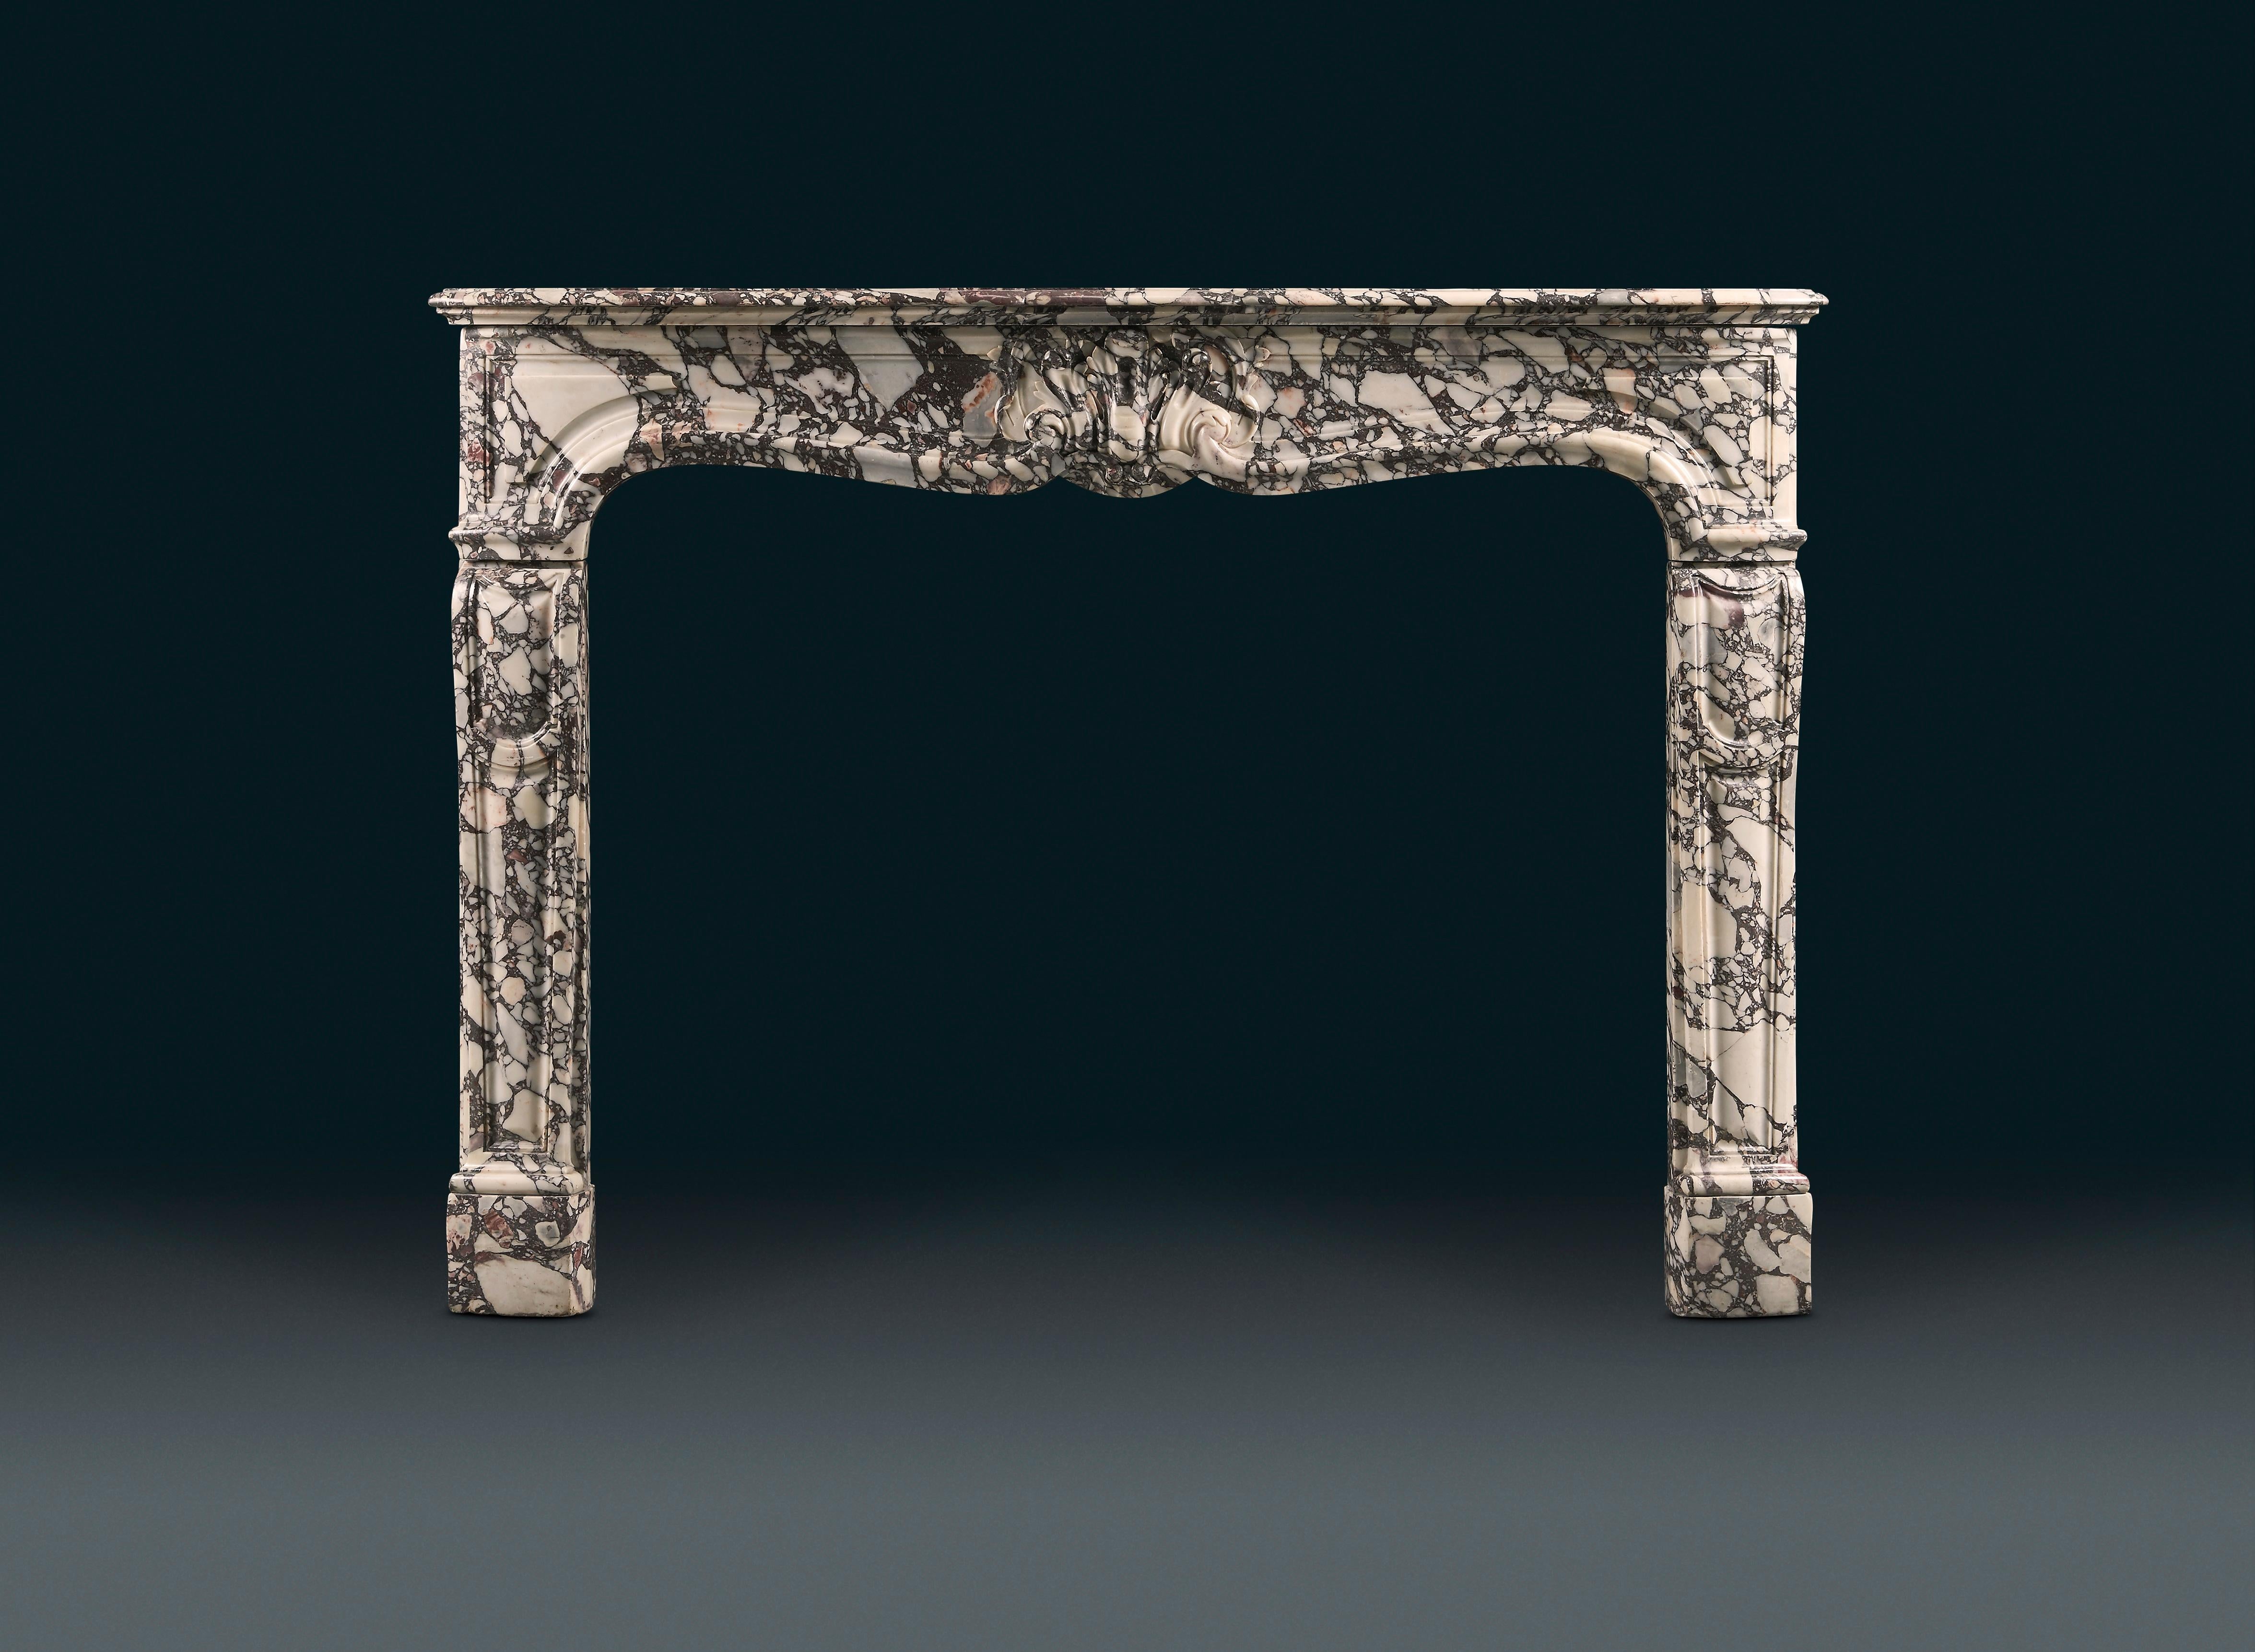 A pretty French, mid-18th century, Louis XV Rococo style fireplace in variegated Breche Violette marble from the Serravezza region of Carrara, of good color with bold lilacs and soft pinks on a white background. The serpentine moulded shelf with